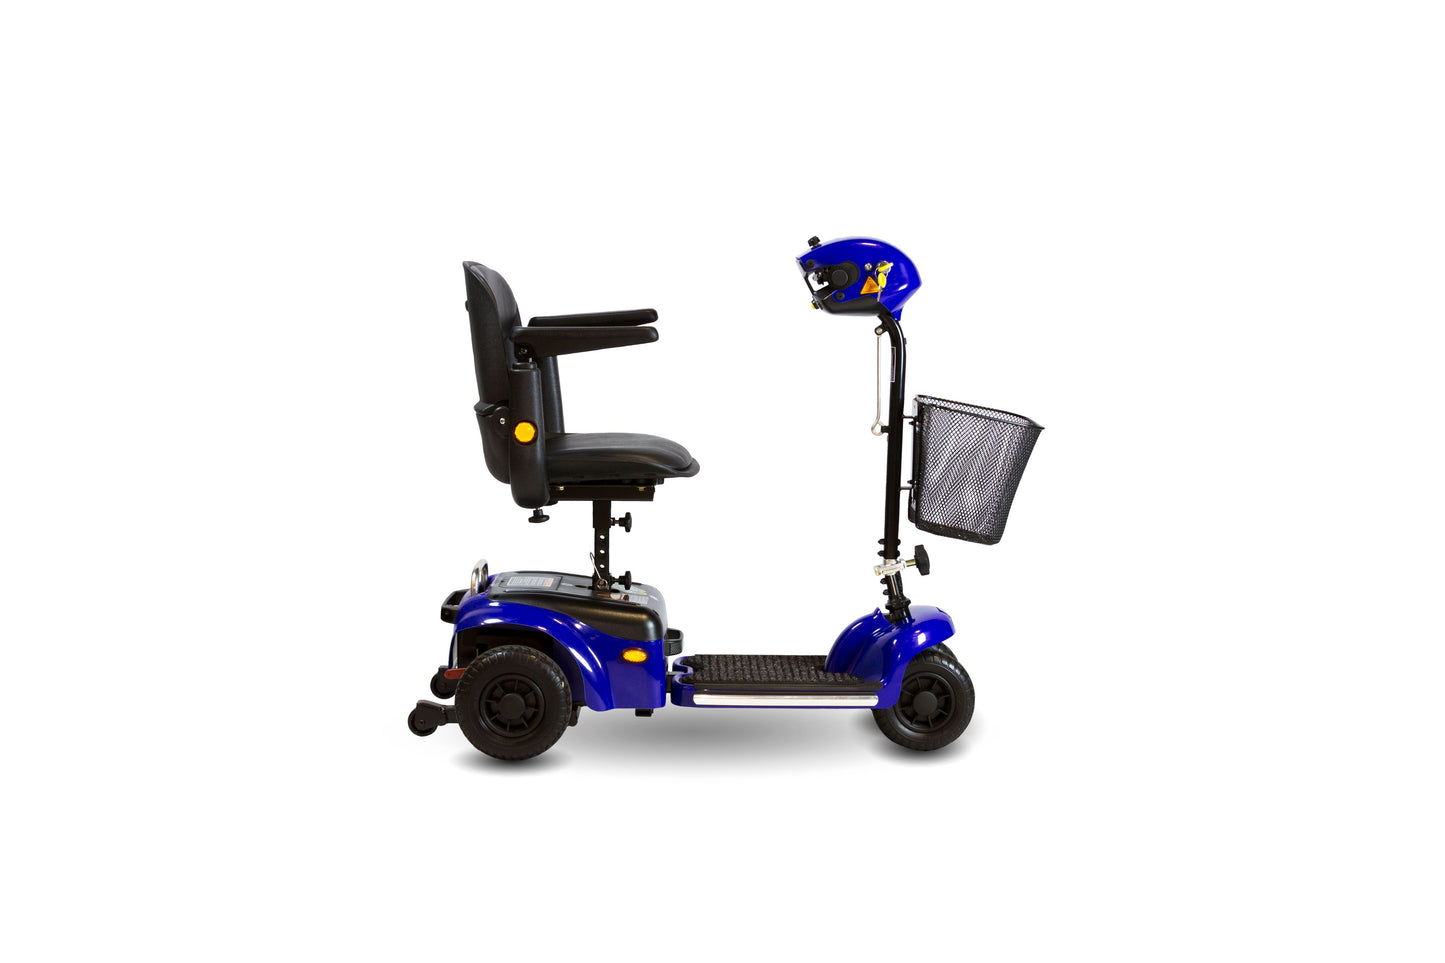 Shoprider Scootie 4-Wheel Lightweight Mobility Scooter Blue - Fold Down For Easy Storage, For Seniors